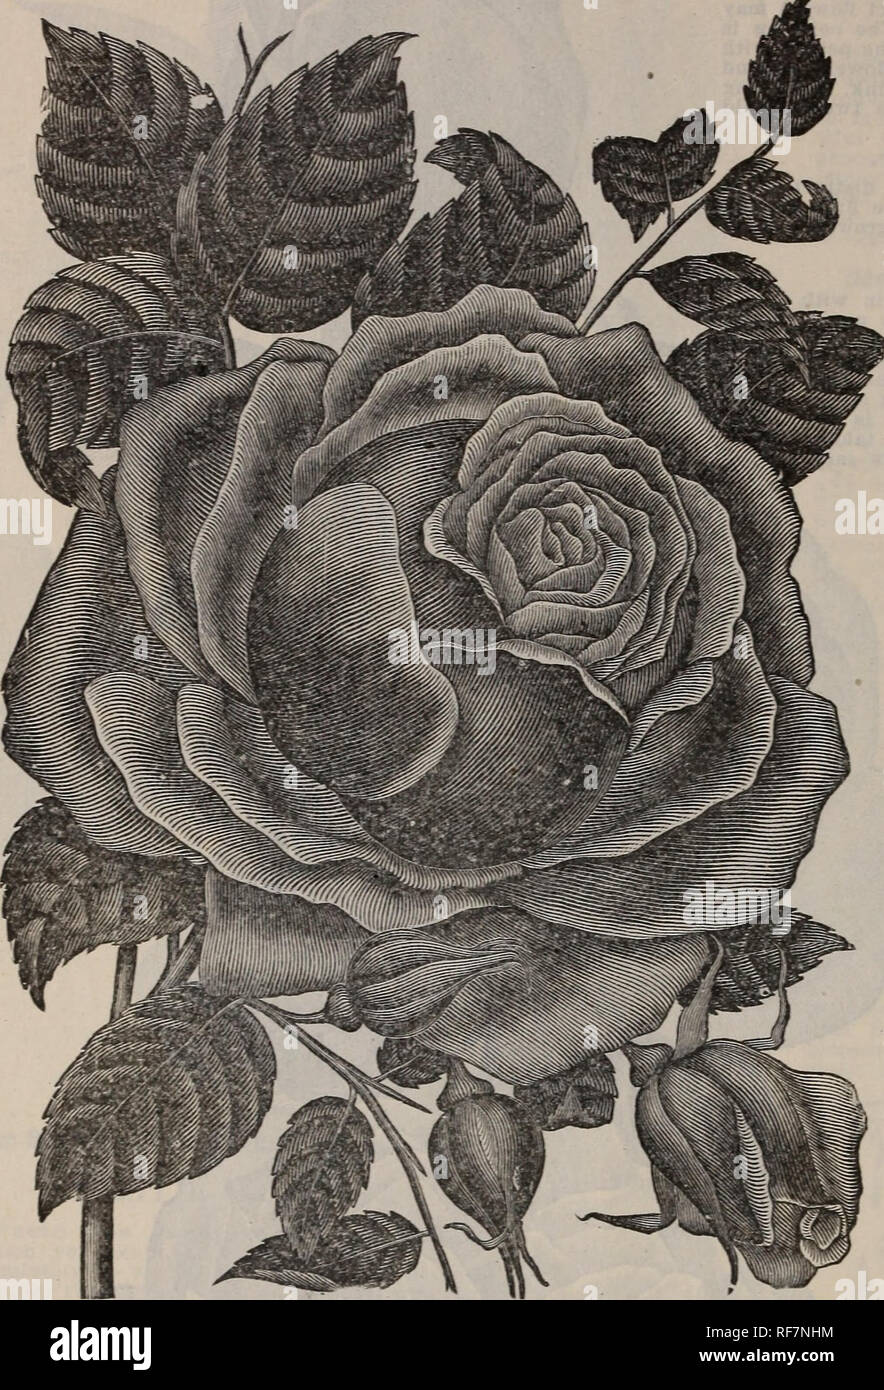 . Floral gems. Nursery stock Ohio Springfield Catalogs; Plants, Ornamental Catalogs; Flowers Catalogs; Bulbs (Plants) Catalogs; Flowering shrubs Catalogs. 14 the McGregor brothers co.. Springfield, ohio. A Page of Crimson Beauties in looses.. CHRISTINE DE XOUE. Fine Crimson Tea Rose, PAPA G0NT1ER. A grand red Tea, of fine crimson shade and silken tex- ture (as distinct from velvety texture). The bud is fine size and graceful form, and you would never suspect from it that the rose is only semi-double. Extremely free, both in growth and bloom. Very long and beautifully leaved stems can be cut, t Stock Photo